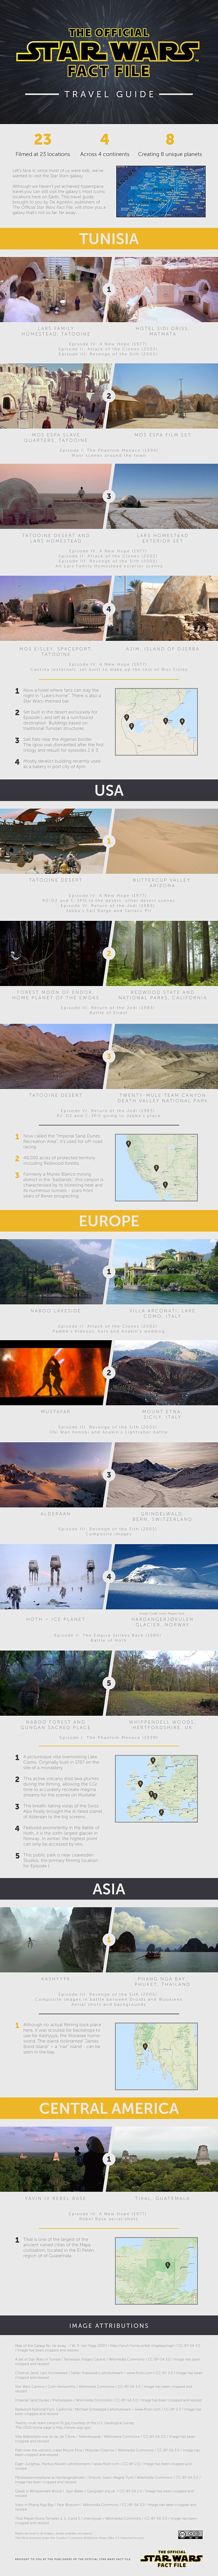 star wars day 2015 star wars travel guide infographic